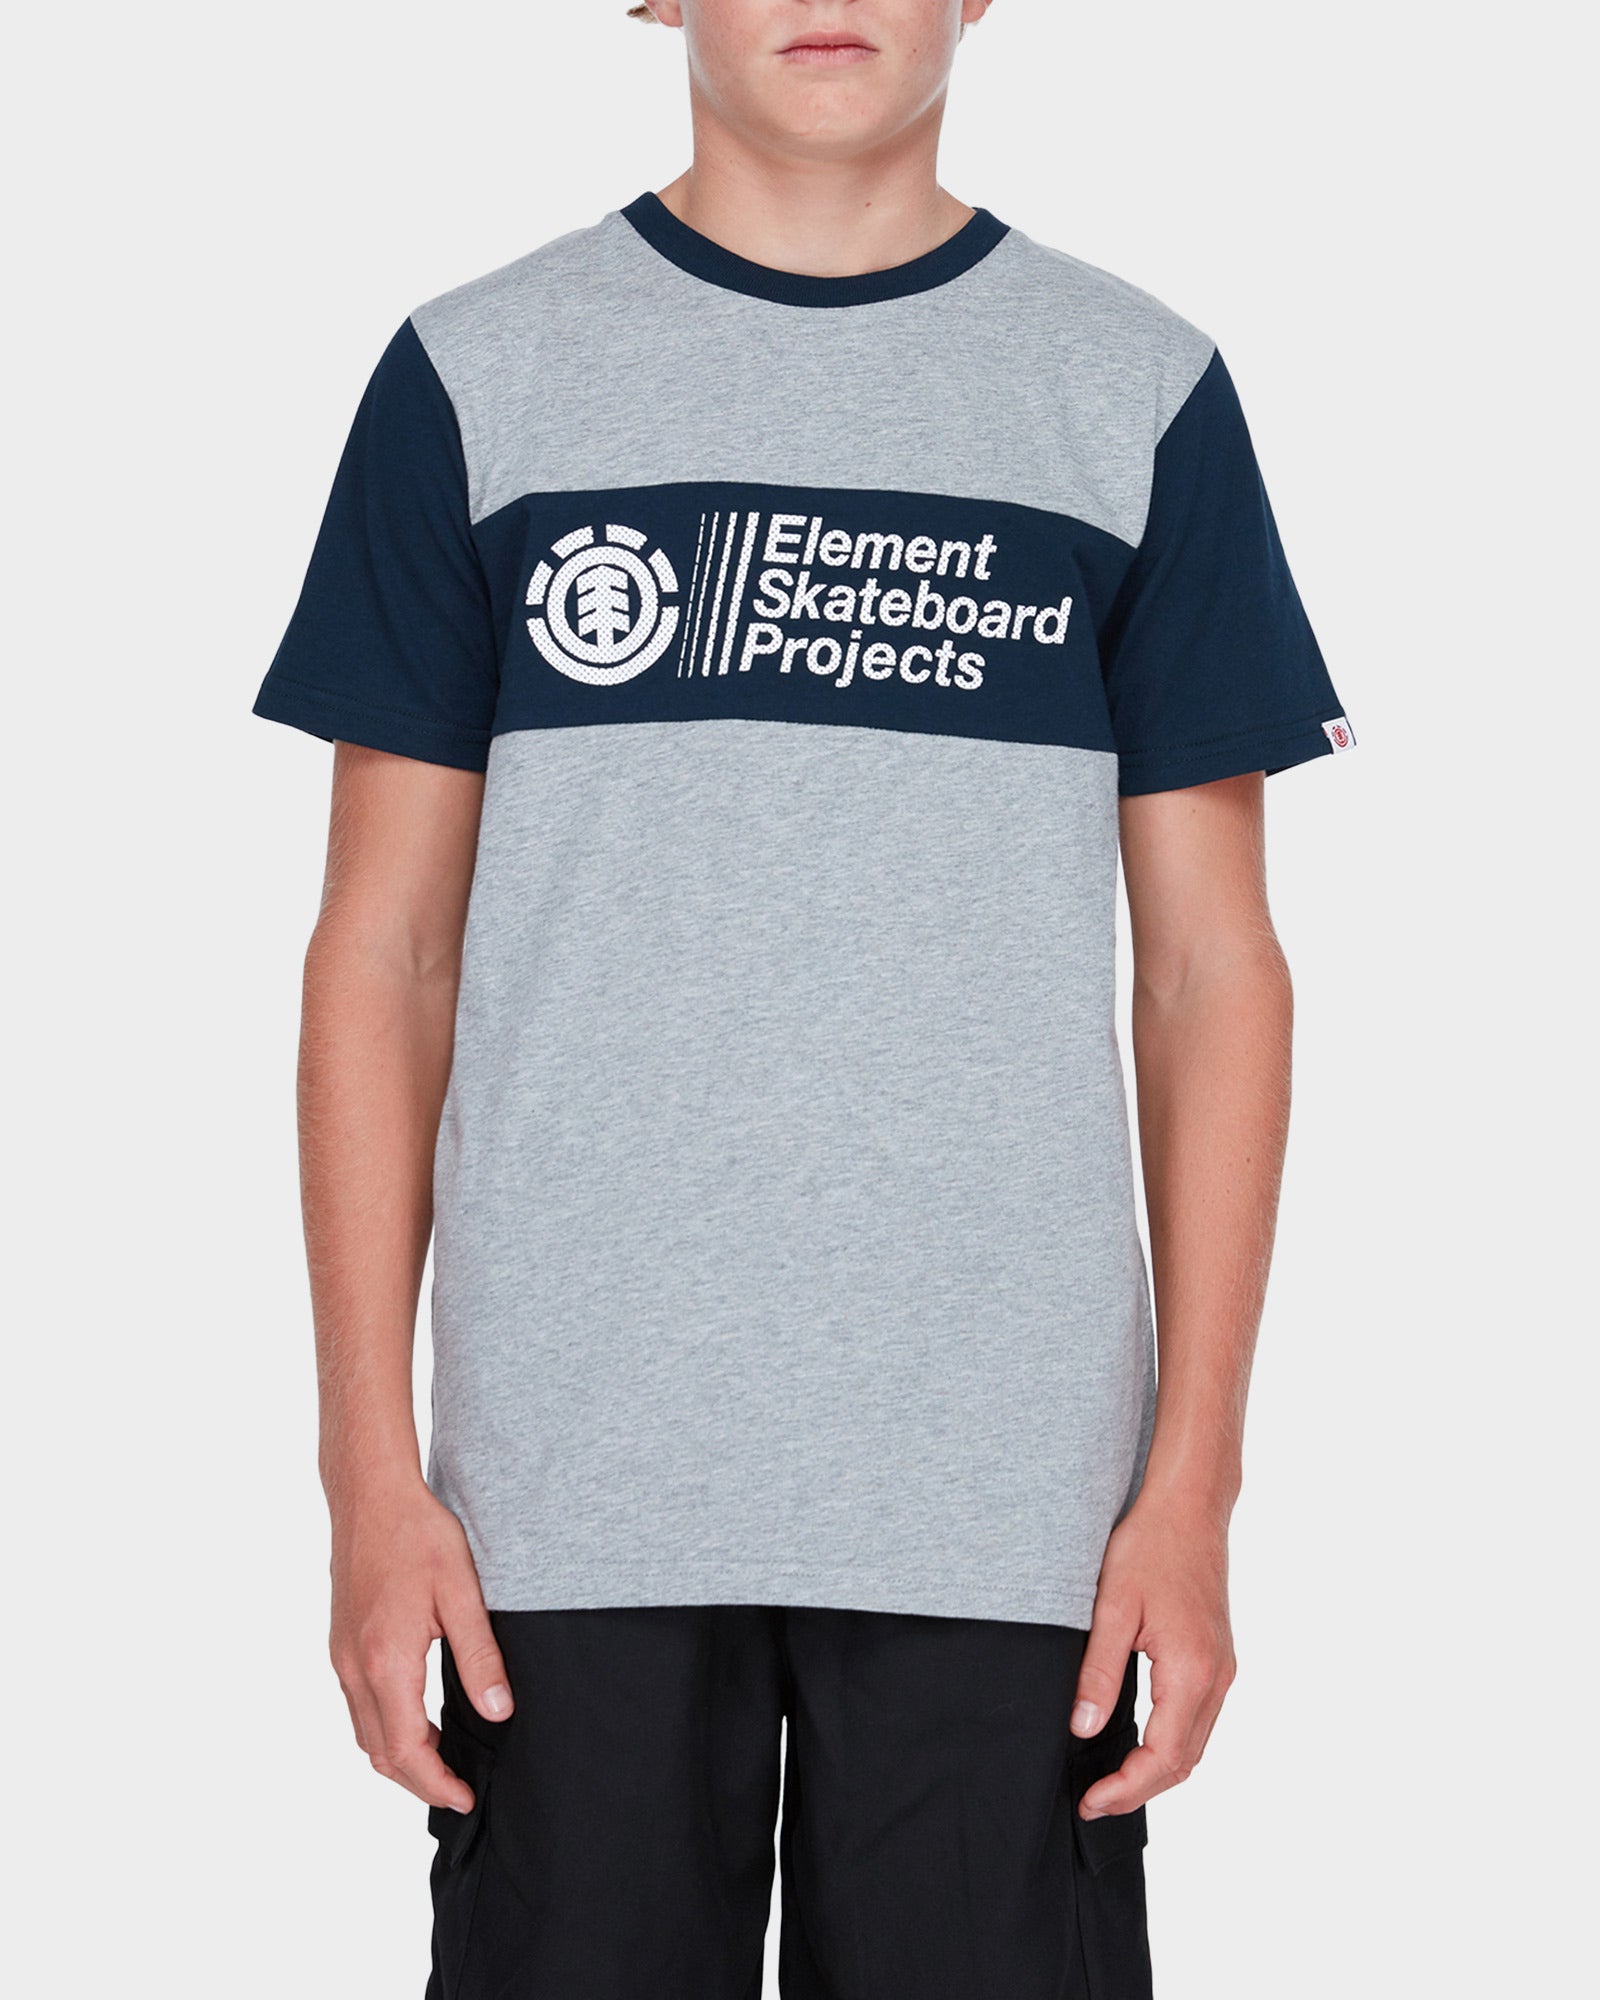 YOUTH PROJECTS SHORT SLEEVE TEE